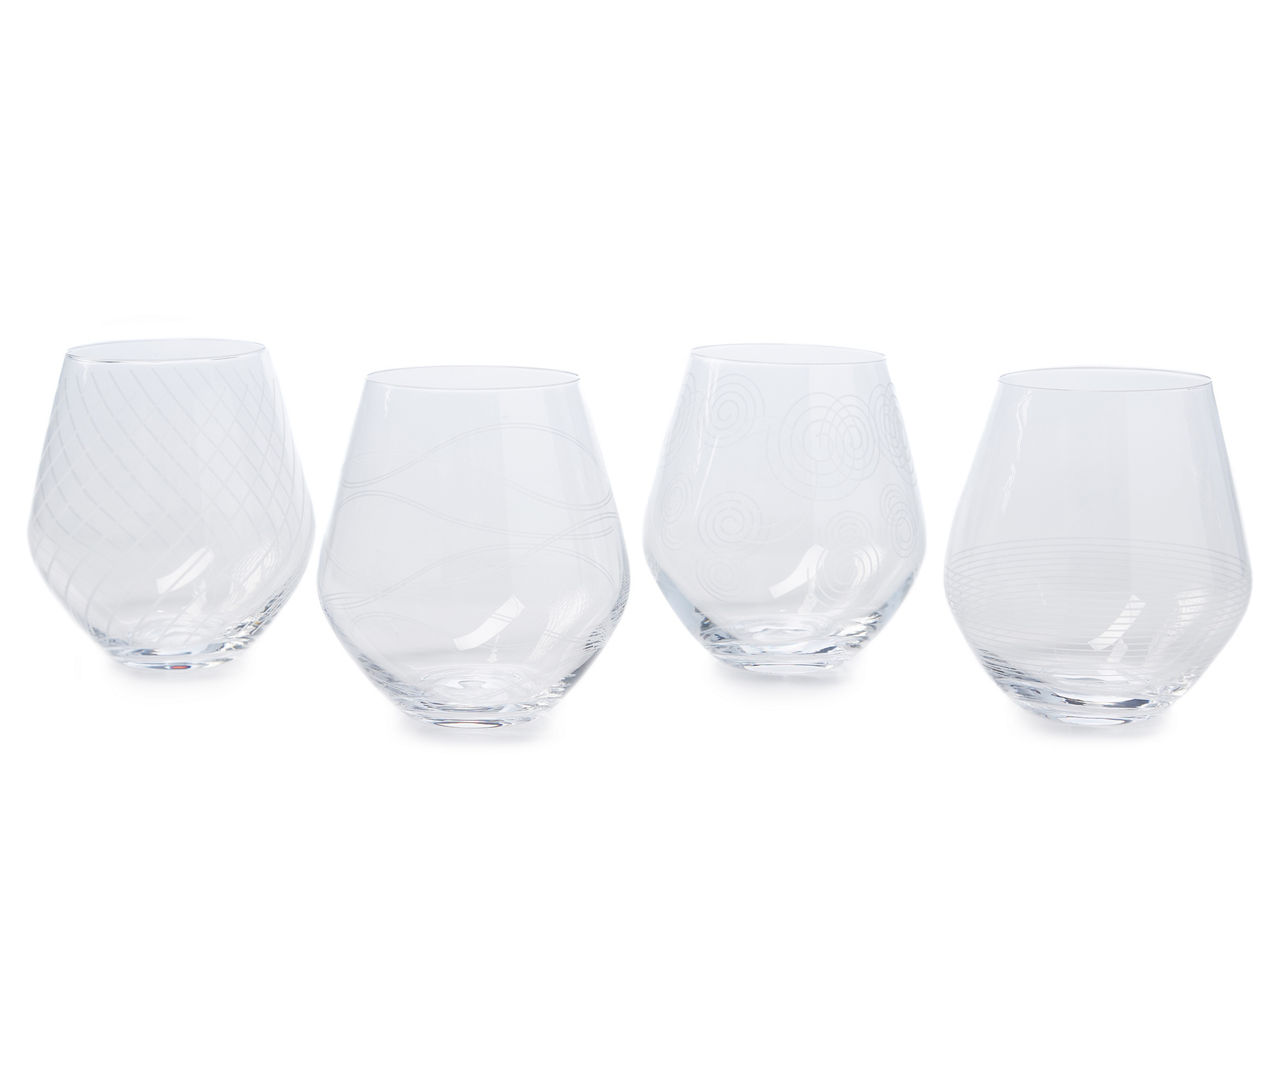 ACK 4170 Etched Stemless Wine Glass Set of 2 – ACK4170